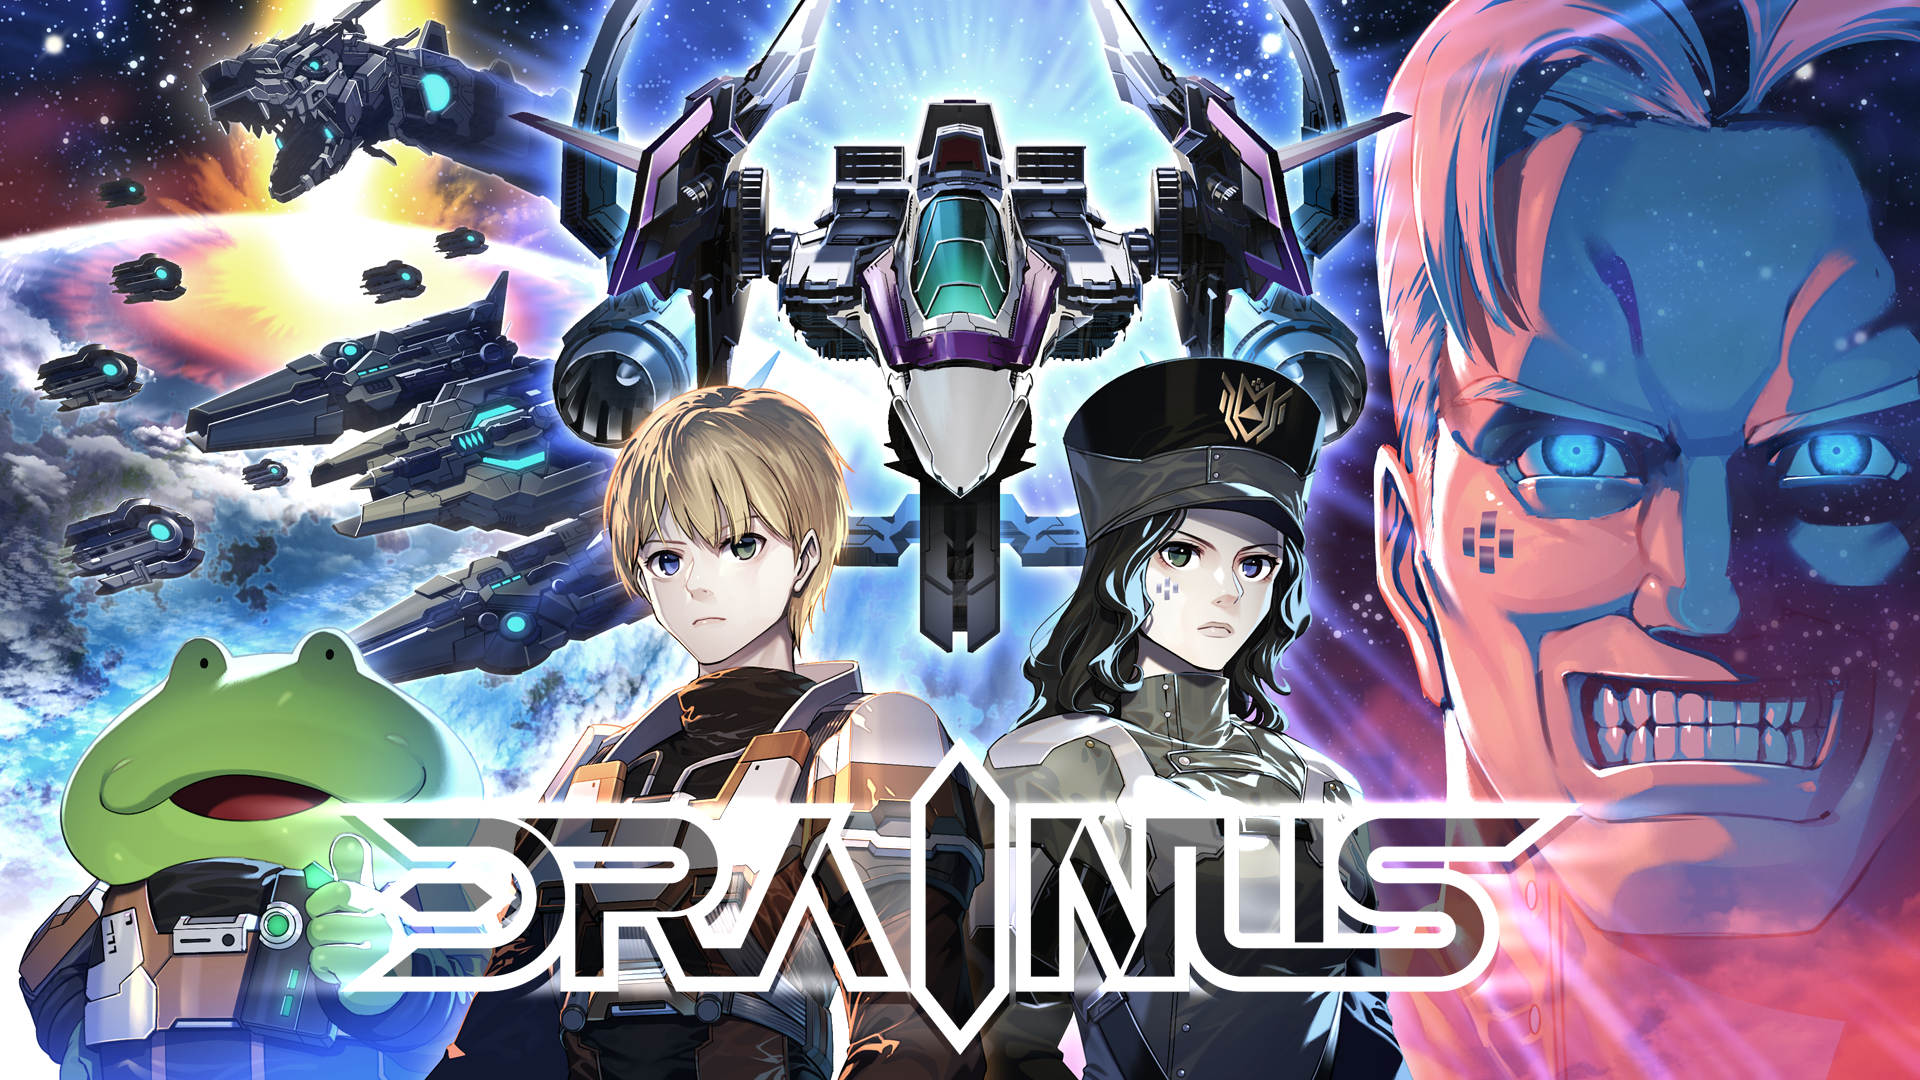 DRAINUS, Team Ladybug’s Original 2D Shooter Made for Players of All Levels, Releases on Switch February 2, 2023!